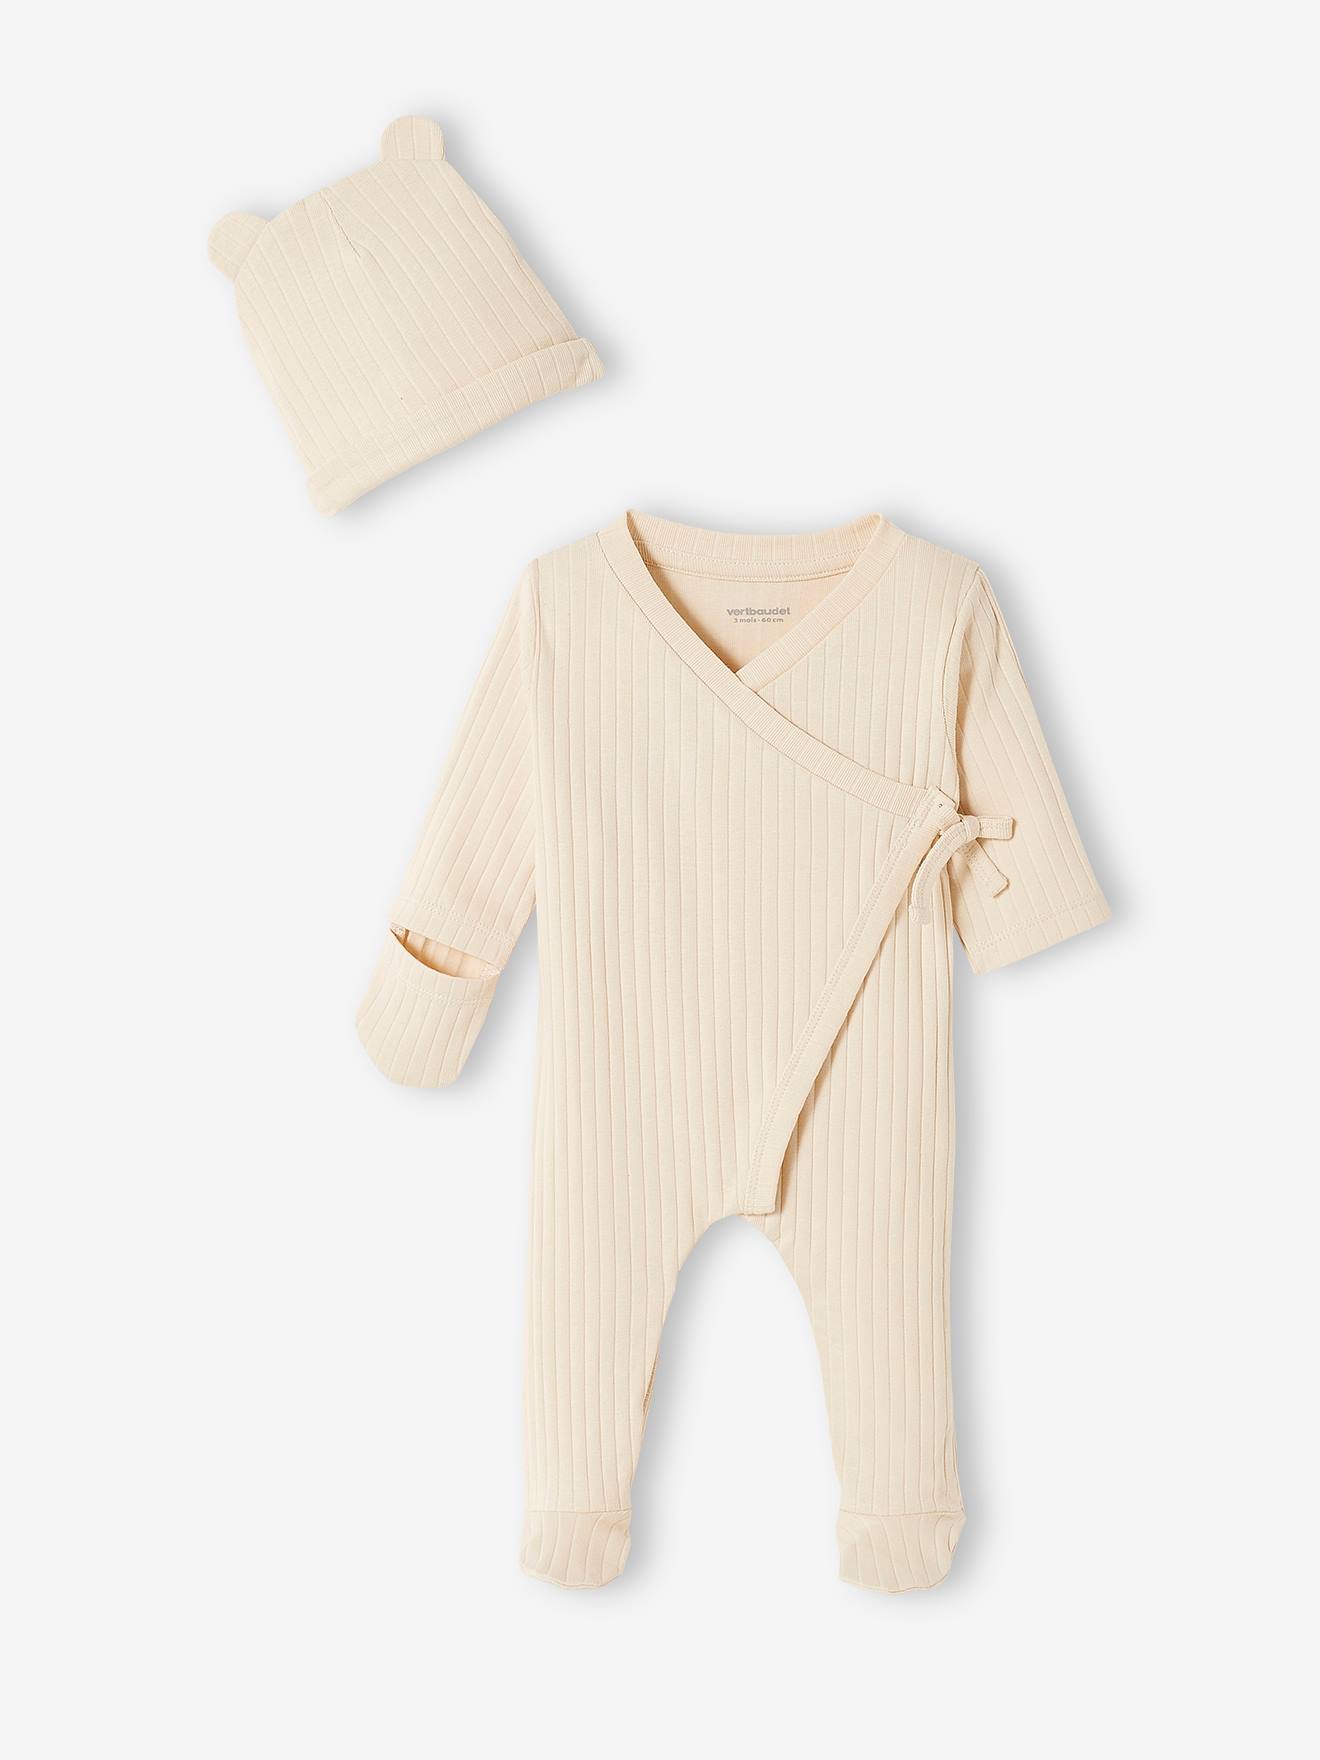 Baby Outfits - Outfit Sets for Girls & Boys - vertbaudet